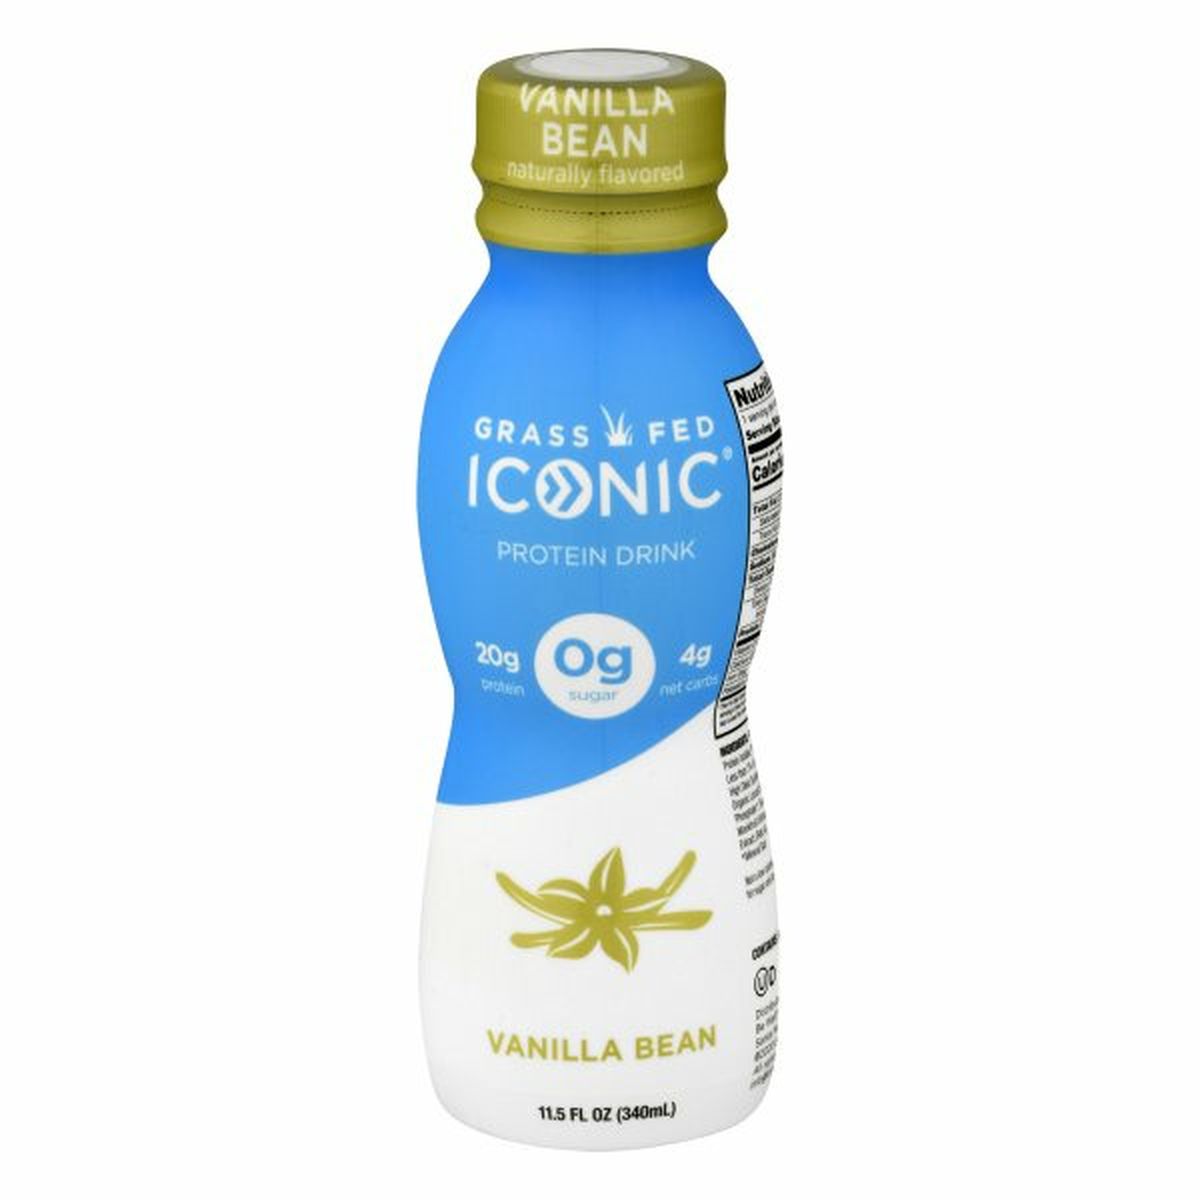 Calories in Iconic Protein Drink, Vanilla Bean